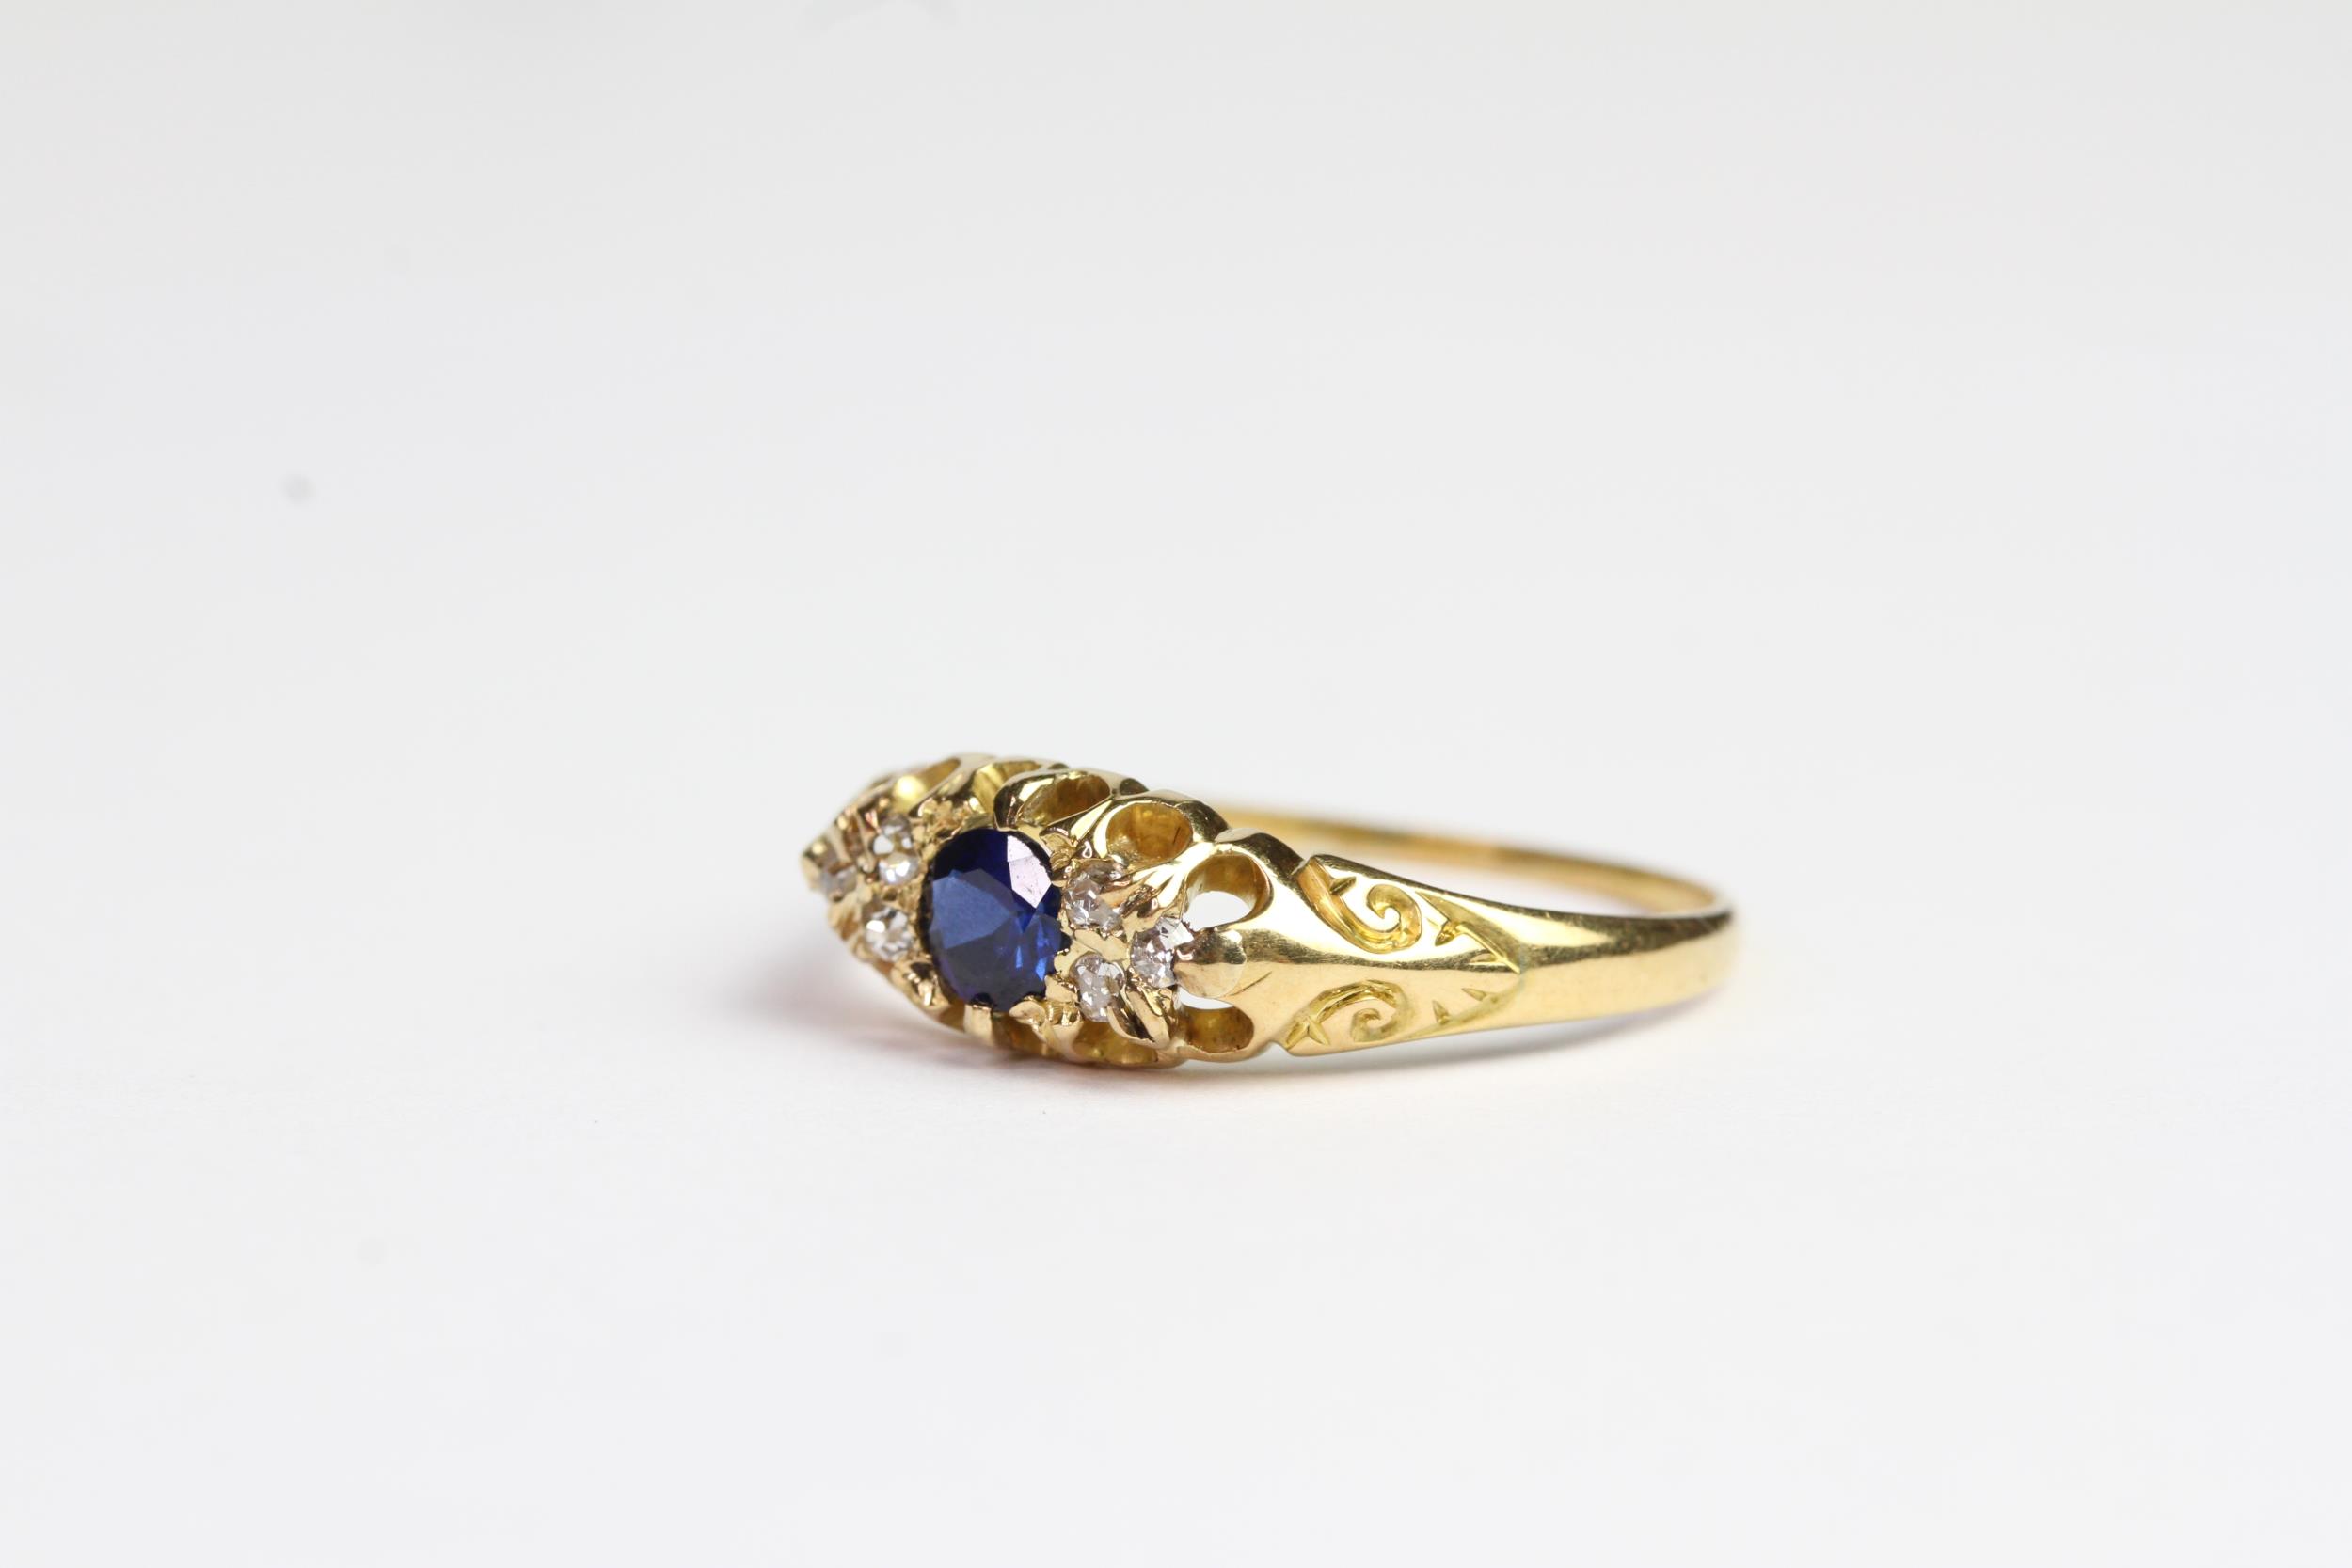 18ct gold ring with sapphire and diamonds - Image 2 of 2